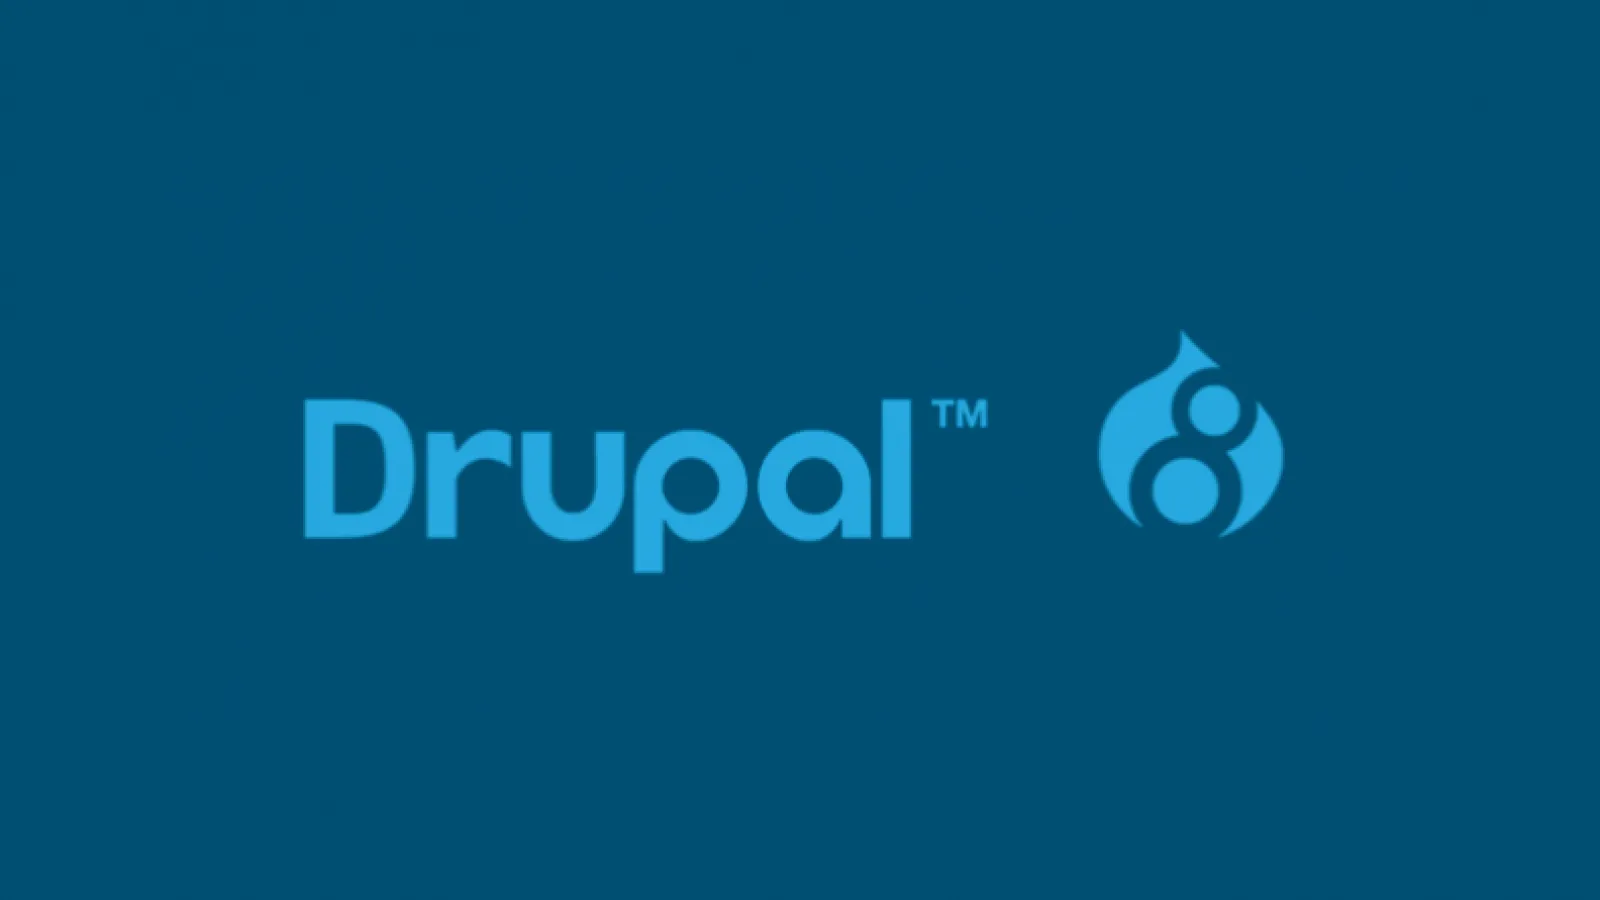 Drupal - The Optimum Solution for the Public Sector